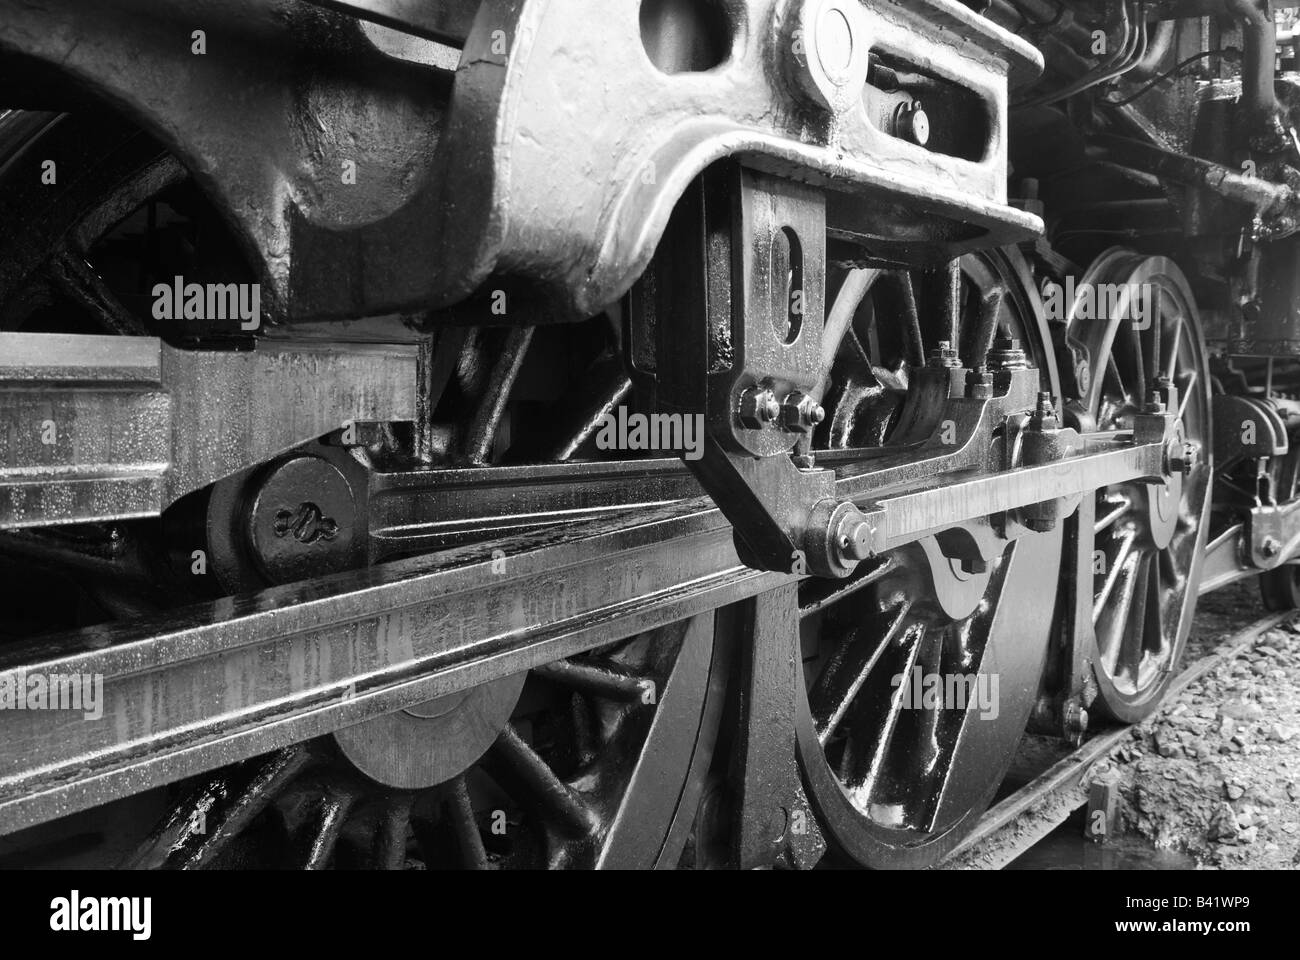 Running gear of old steam engine Stock Photo